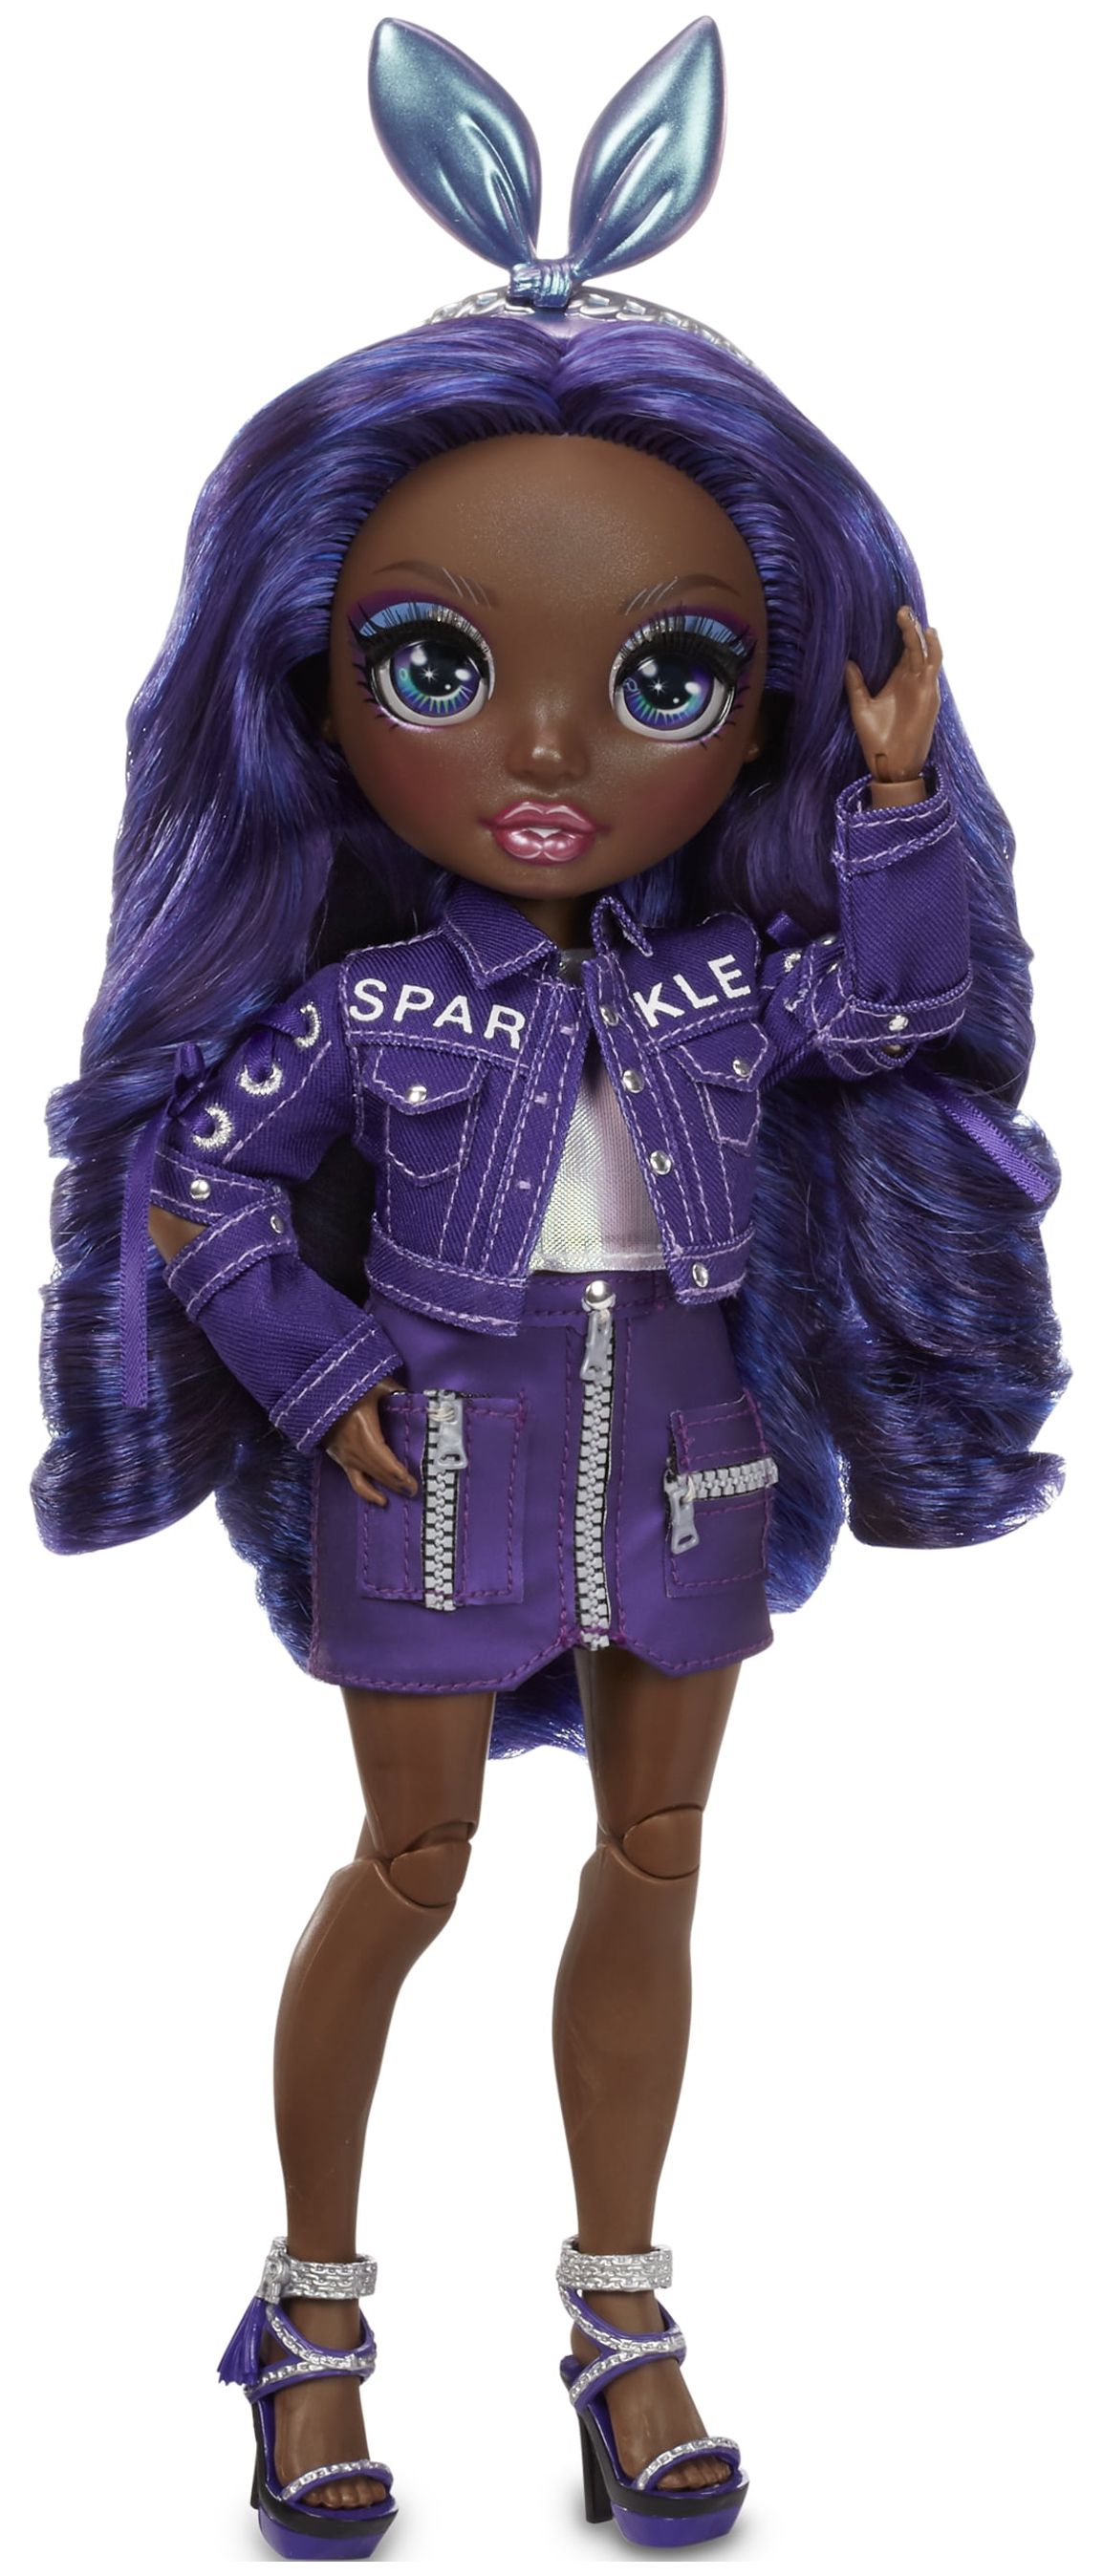 Rainbow High Krystal Bailey – Indigo (Dark Blue Purple) Fashion Doll With 2 Complete Mix & Match Outfits And Accessories, Toys for Kids 6-12 Years Old - image 1 of 8